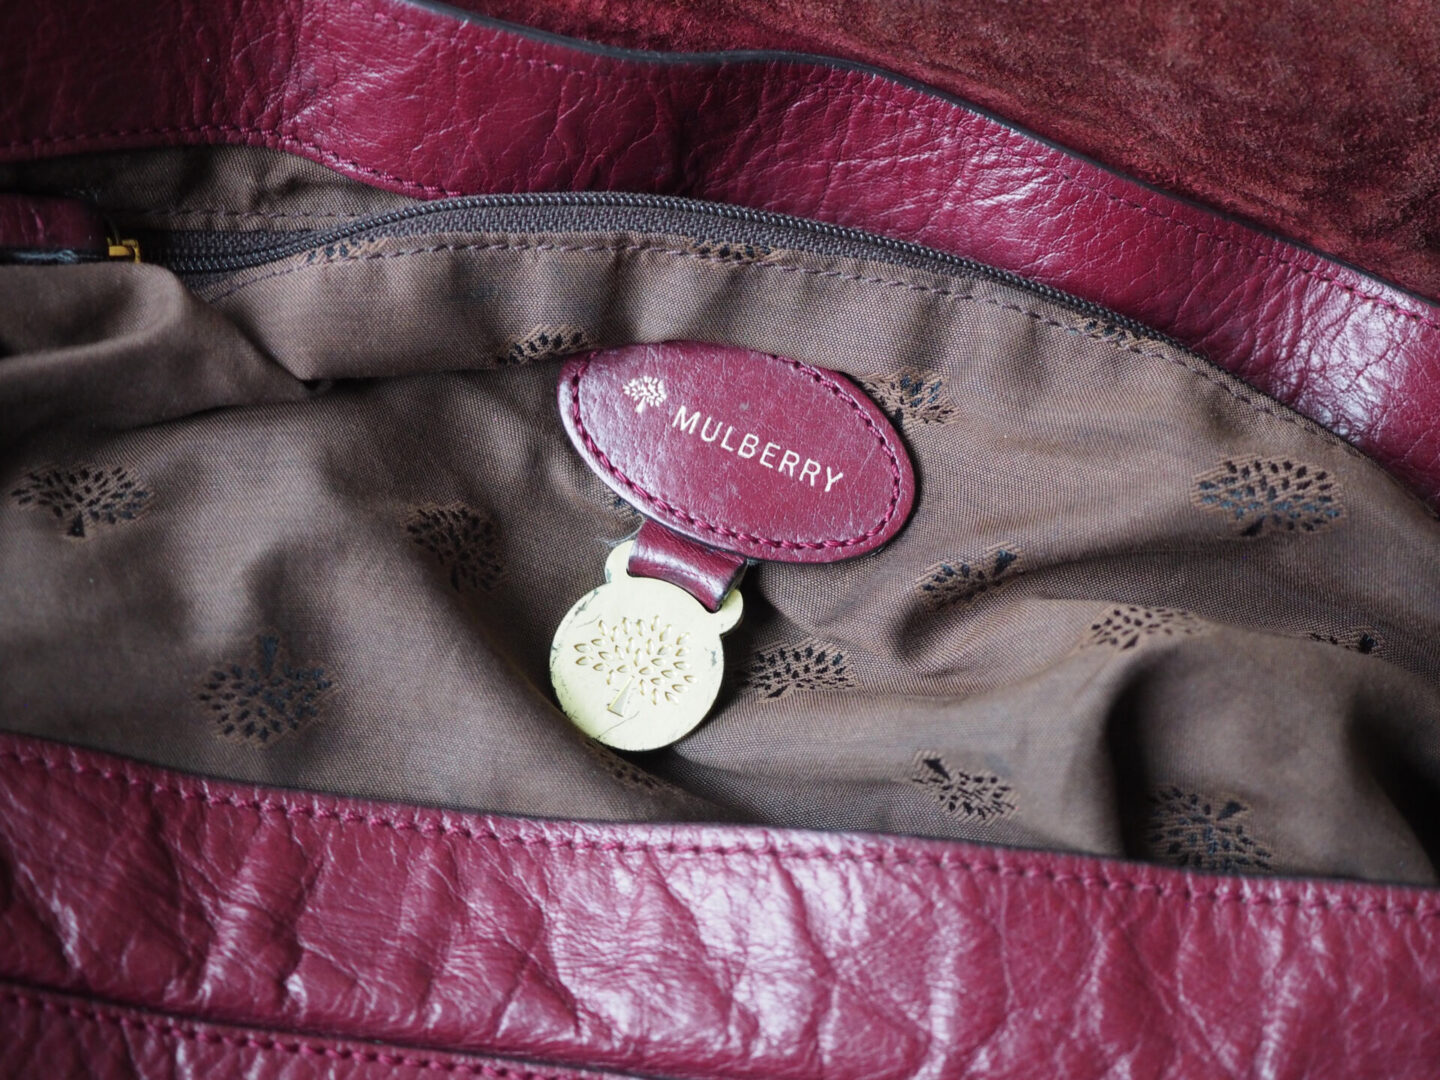 How To Spot a Fake Mulberry Handbag - advice on zips, stitching, leather